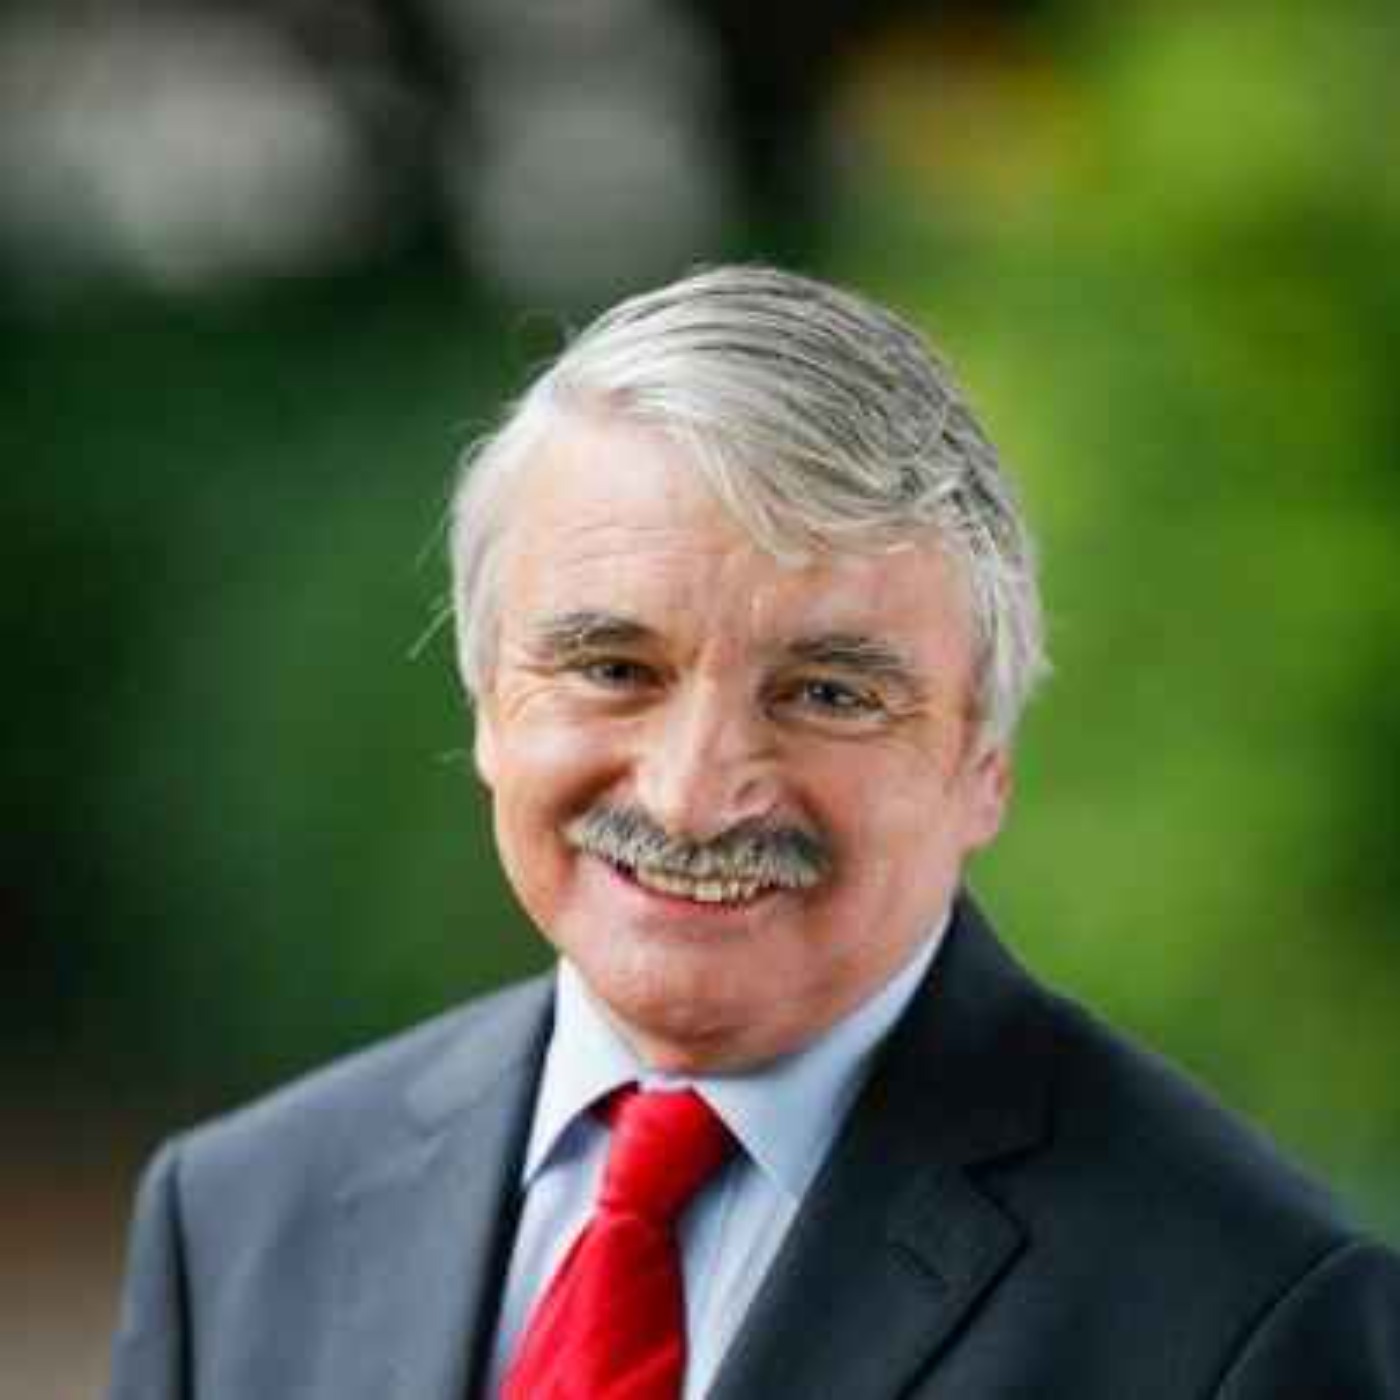 Fianna Fáil's Willie O'Dea reacts to Dee Ryan's performance in the Limerick Mayoral Election